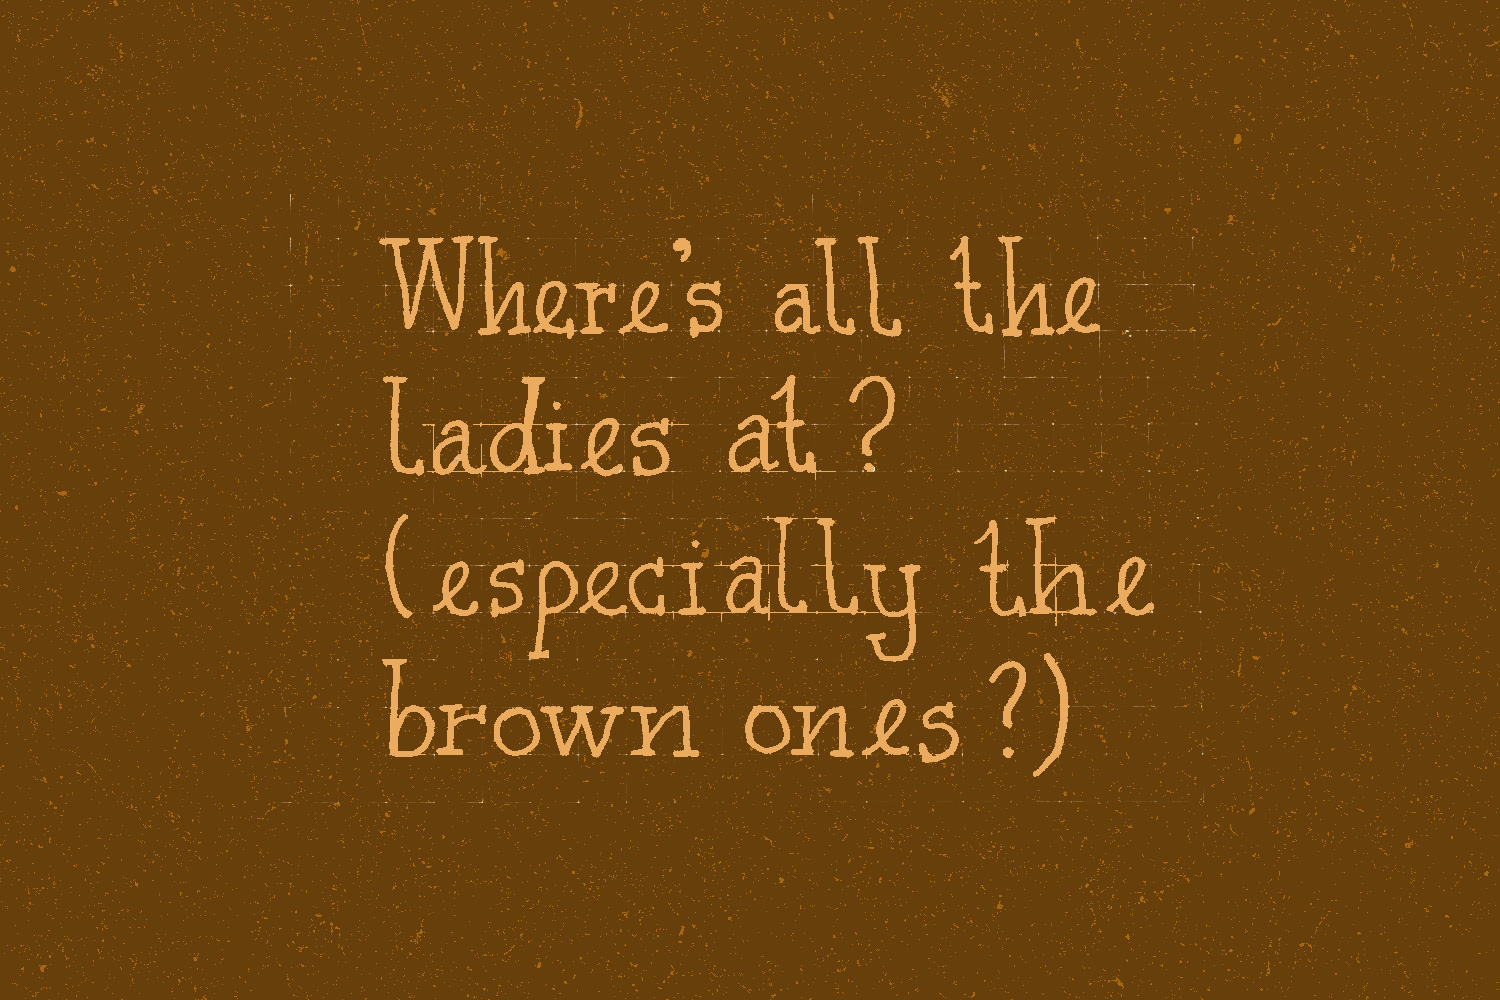 Where’s all the ladies at? (especially the brown ones?)